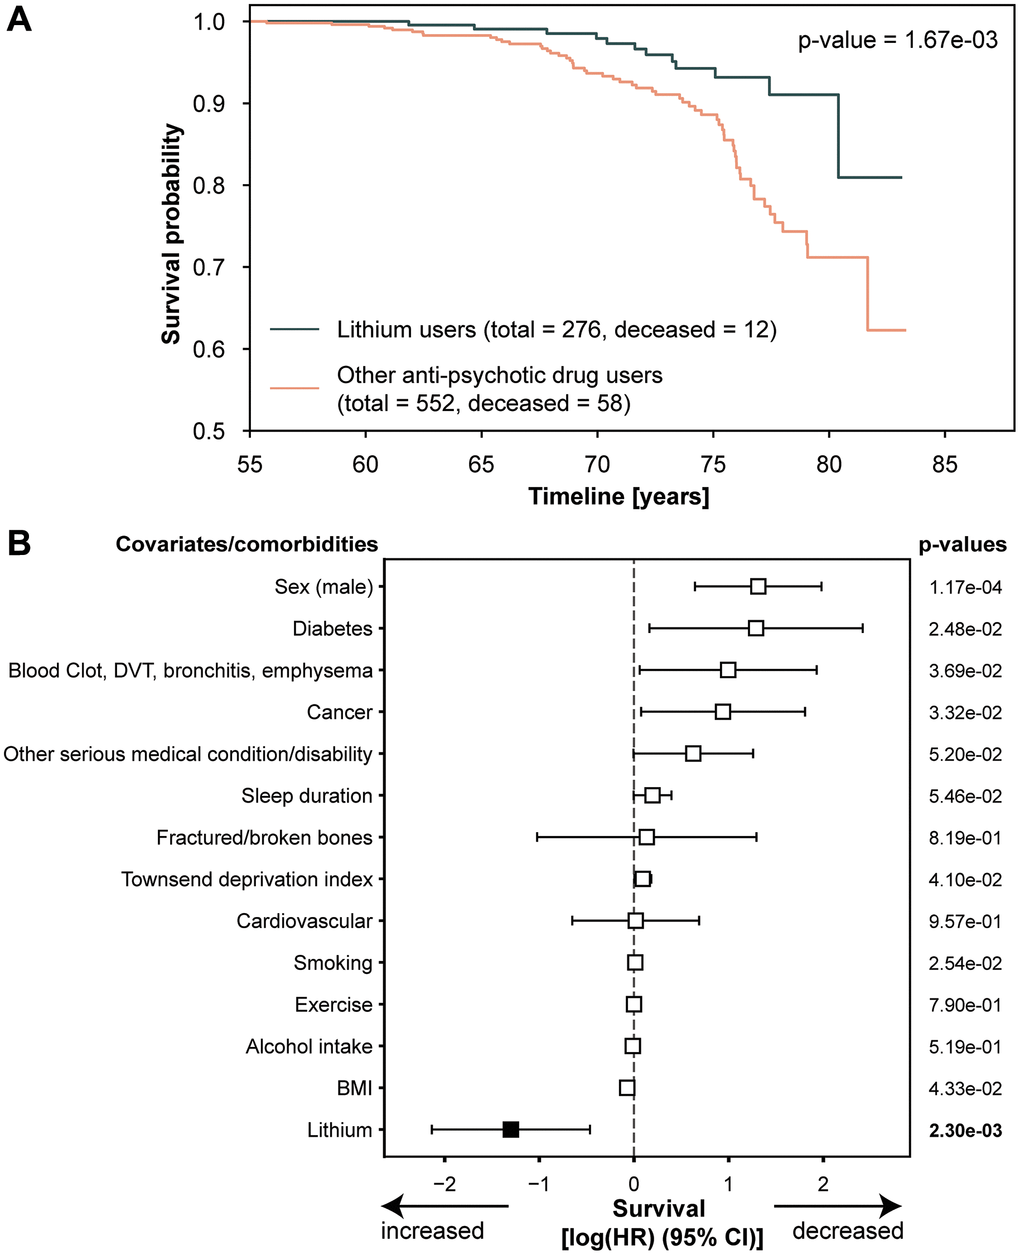 Lithium extends lifespan. (A) Kaplan-Meier curve of survival probability in individuals in the cohort described in A. Suicides are excluded from the dataset; p-value of the logrank test is reported; (B) Forest Plot of Cox proportional hazard multivariable modeling on overall survival in individuals in the cohort described in A. Suicides are excluded from the analysis. Abbreviations: DVT: deep vein thrombosis; BMI: body mass index.